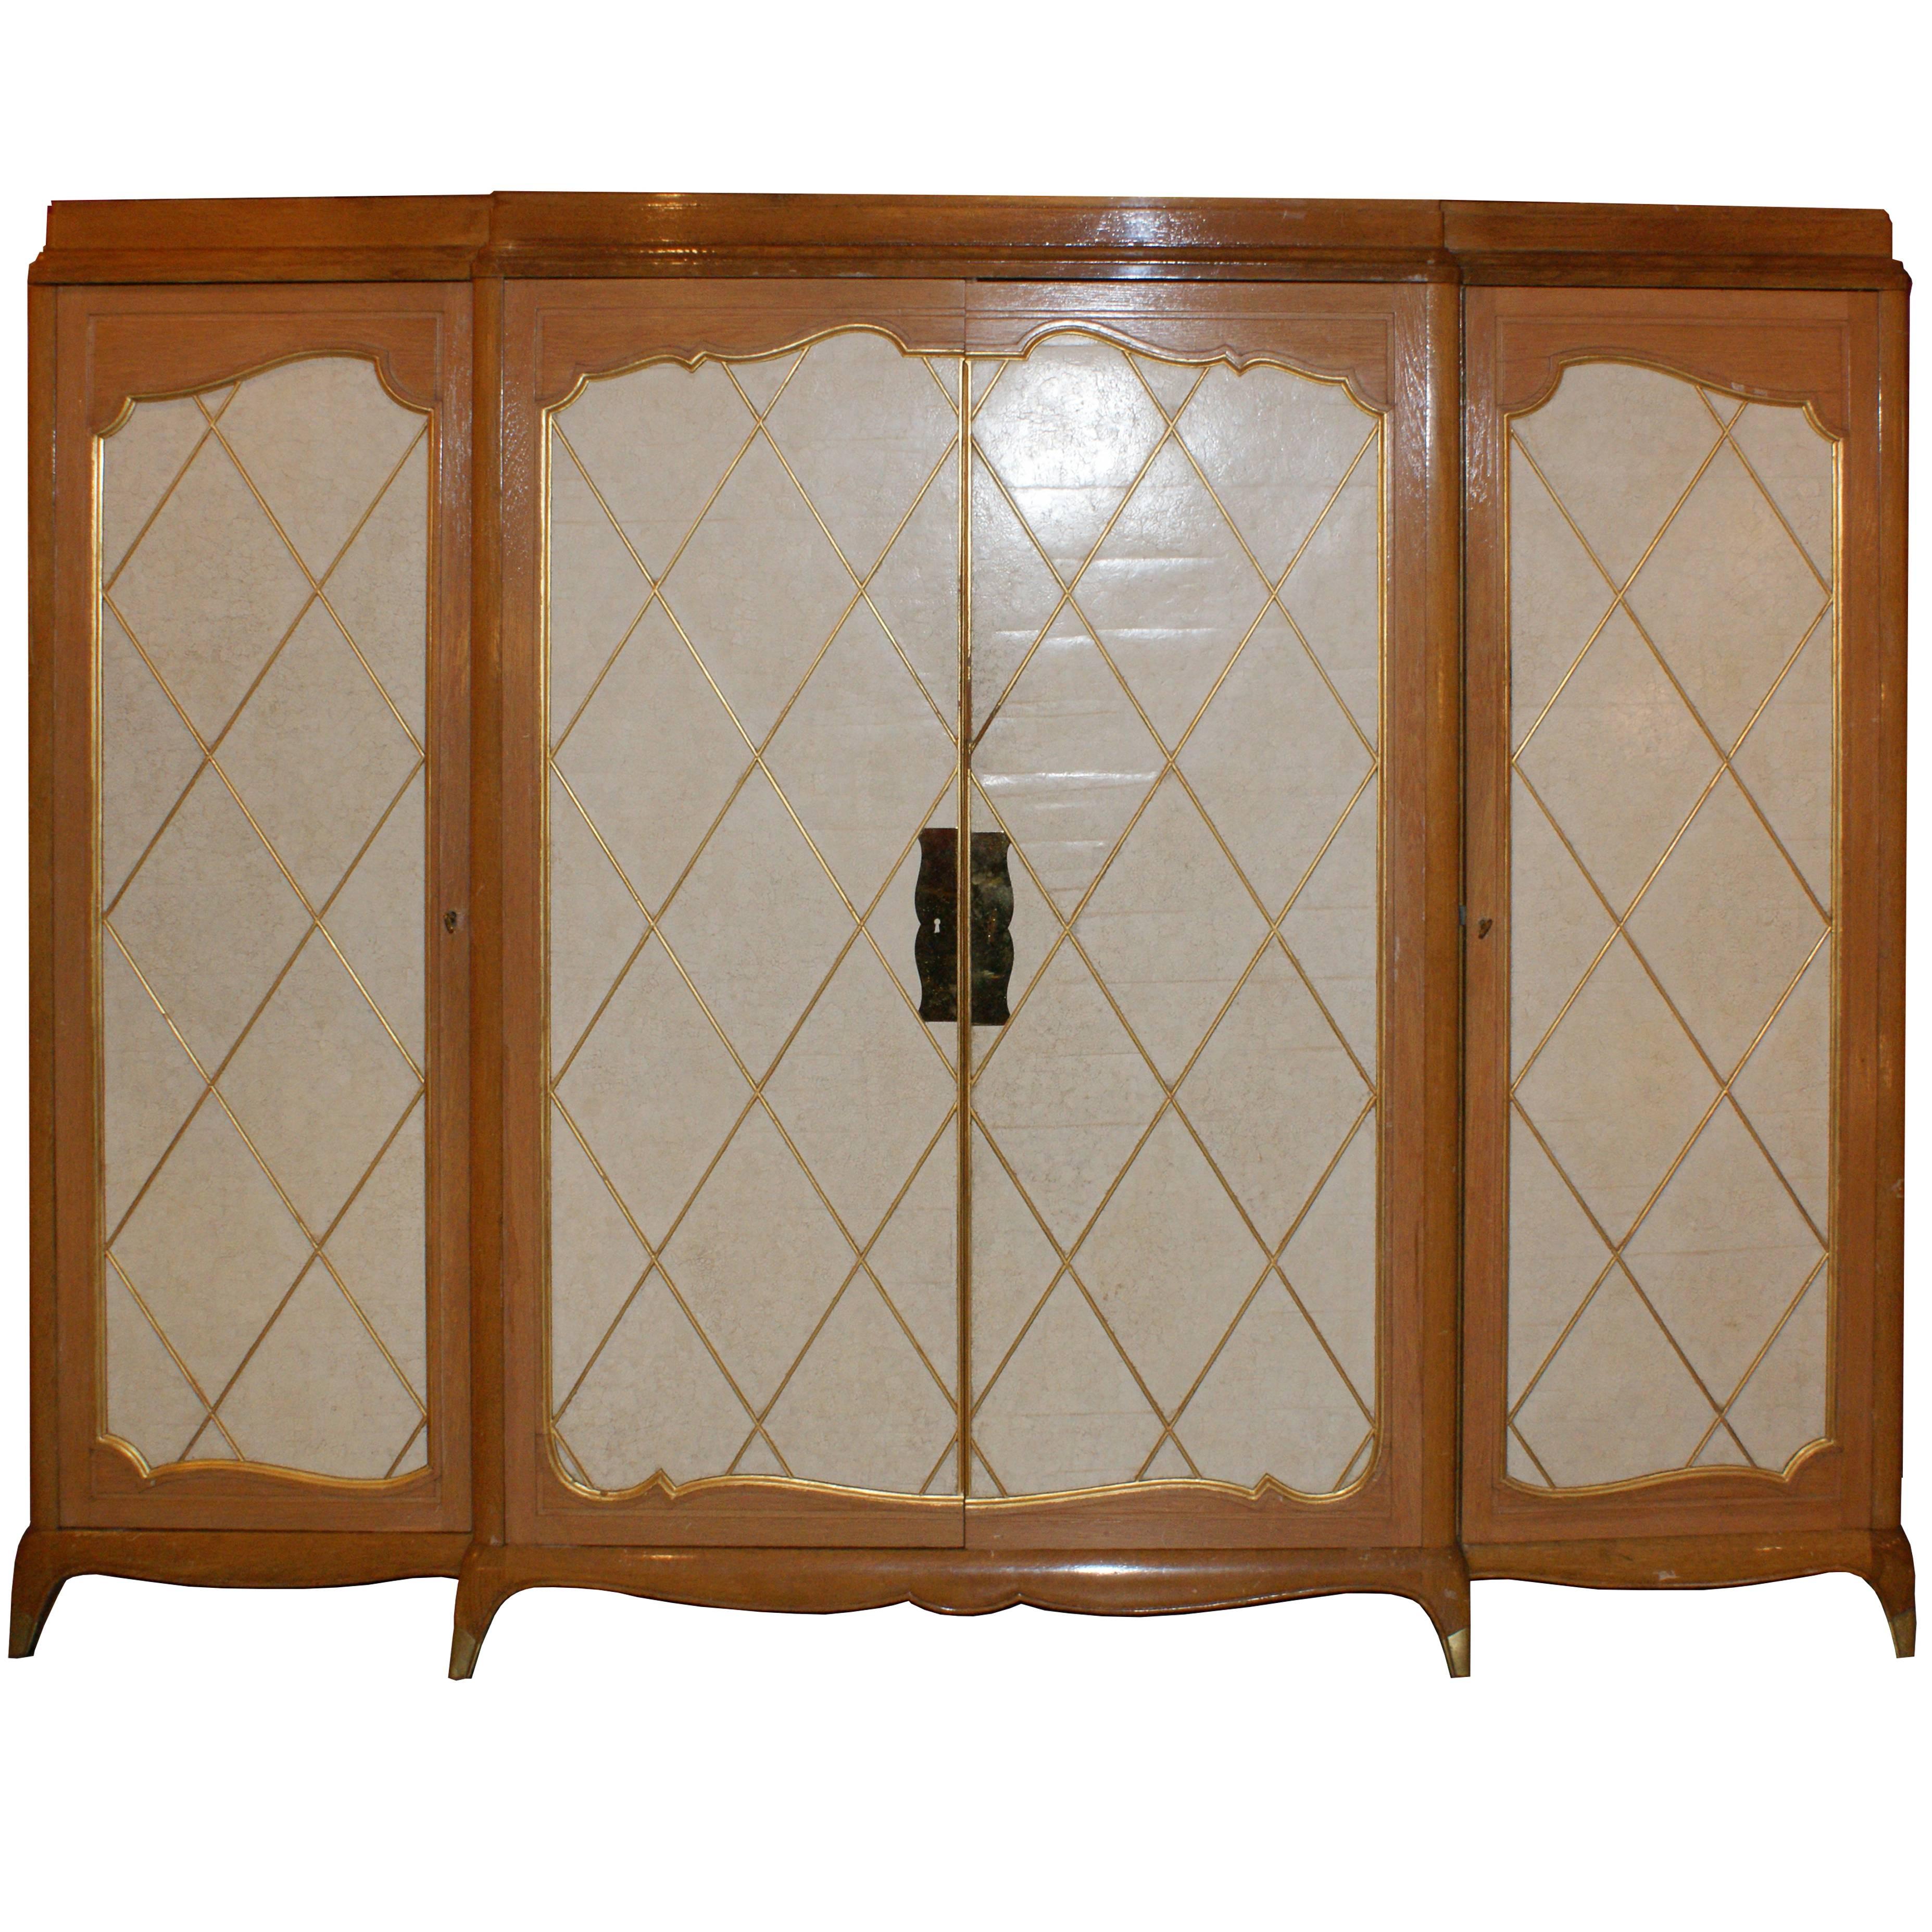 Andrè Arbus, 1940s Wardrobe in Cherrywood and Eggshell, France For Sale